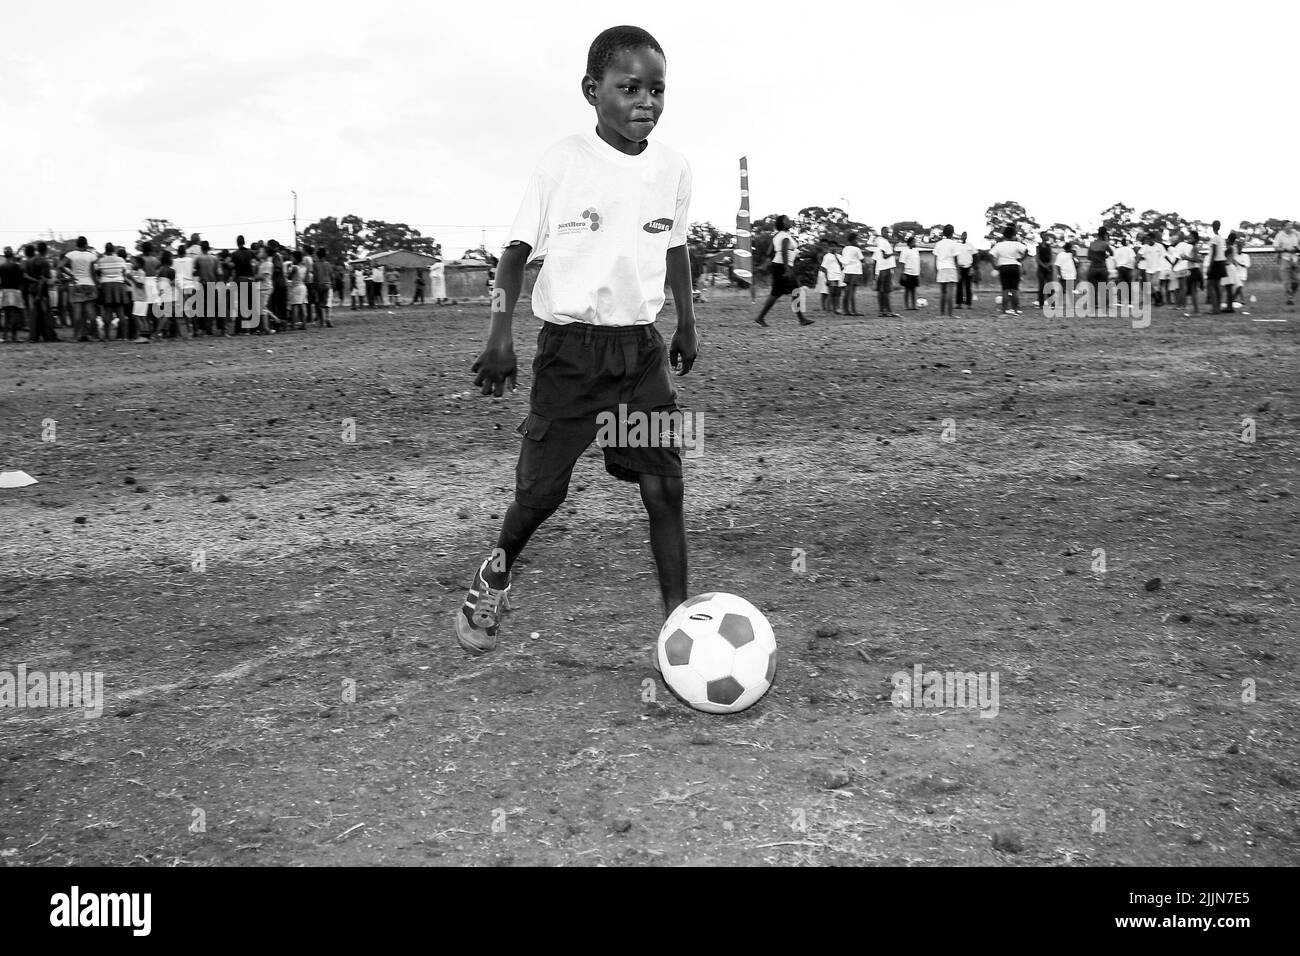 A grayscale of an African kid doing soccer related activities on the school playground in Johannesburg, South Africa Stock Photo